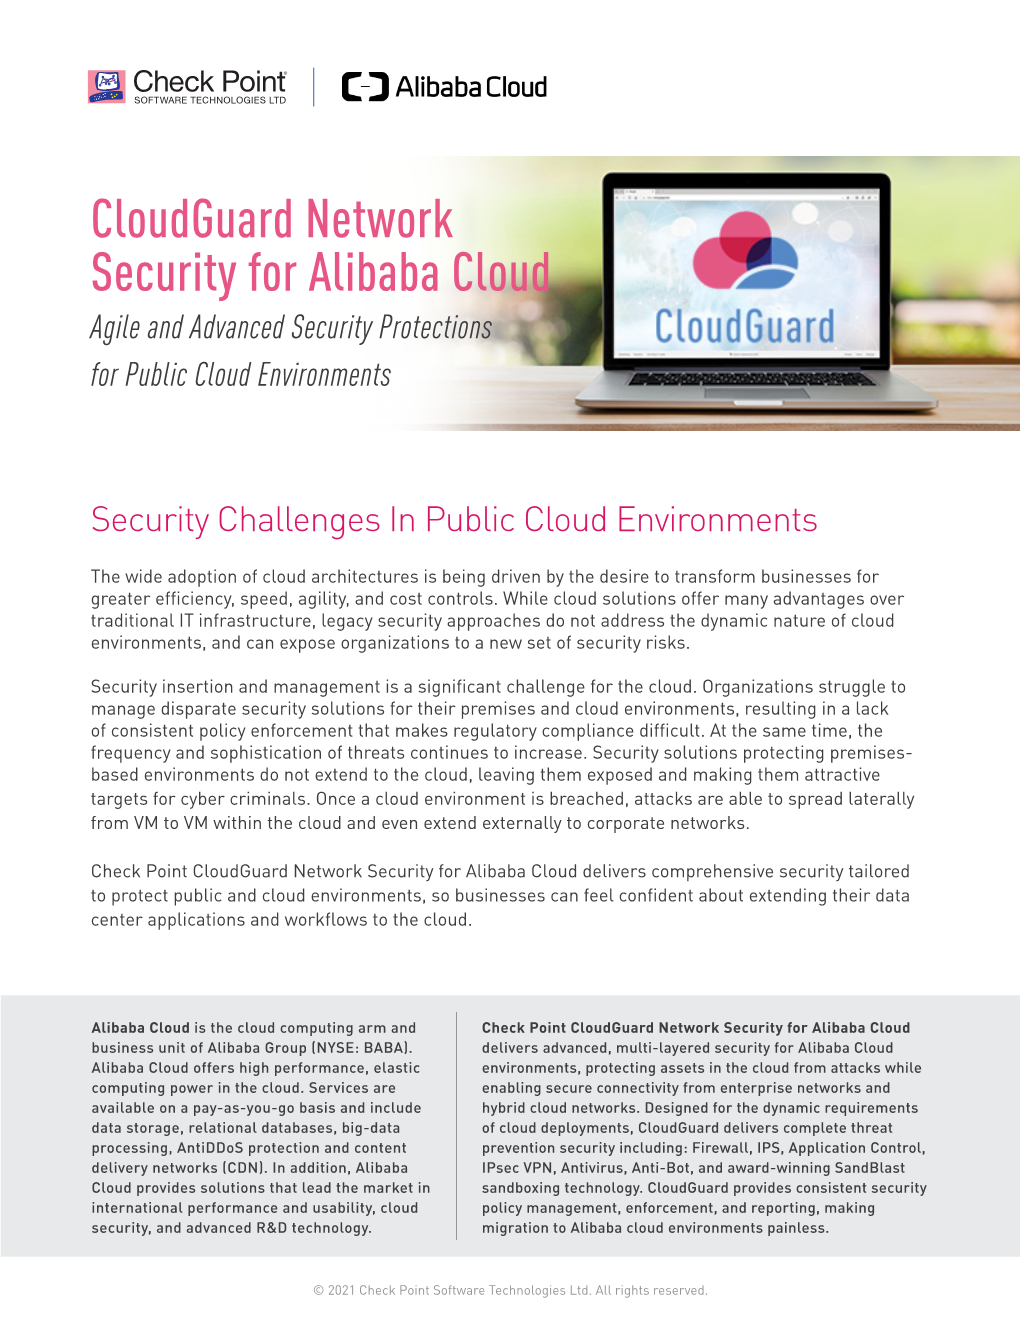 Check Point Cloudguard for Alibaba Cloud